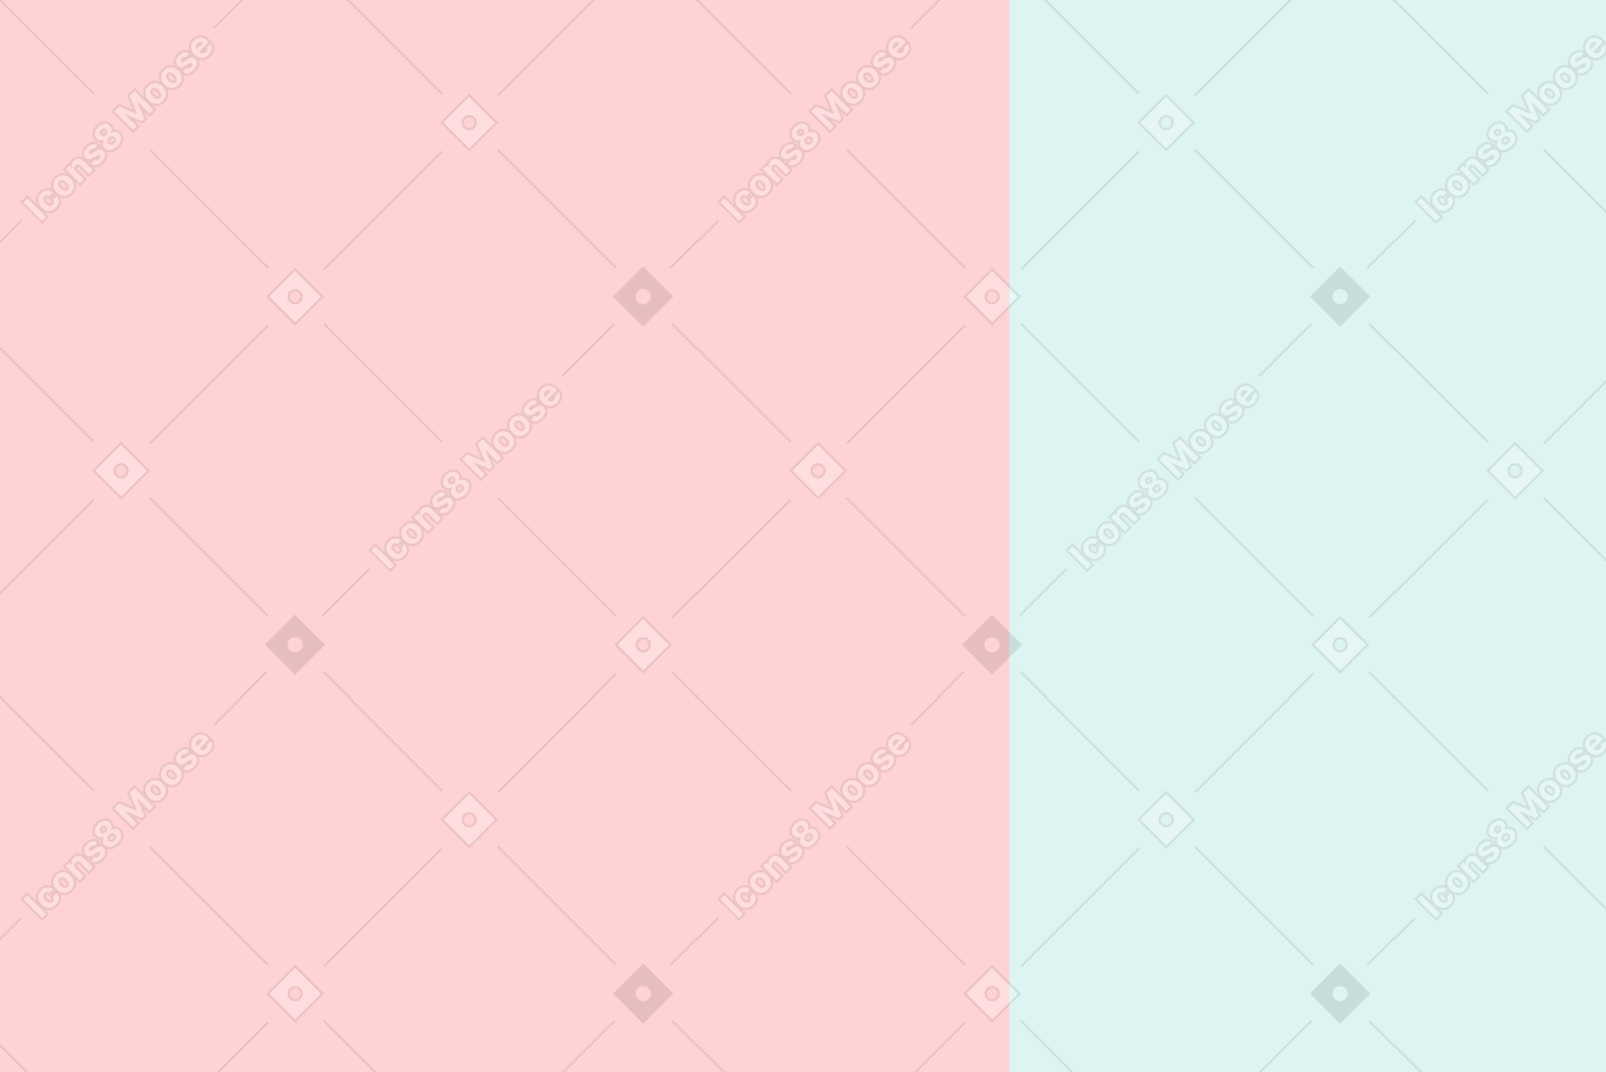 Pastel pink and blue background